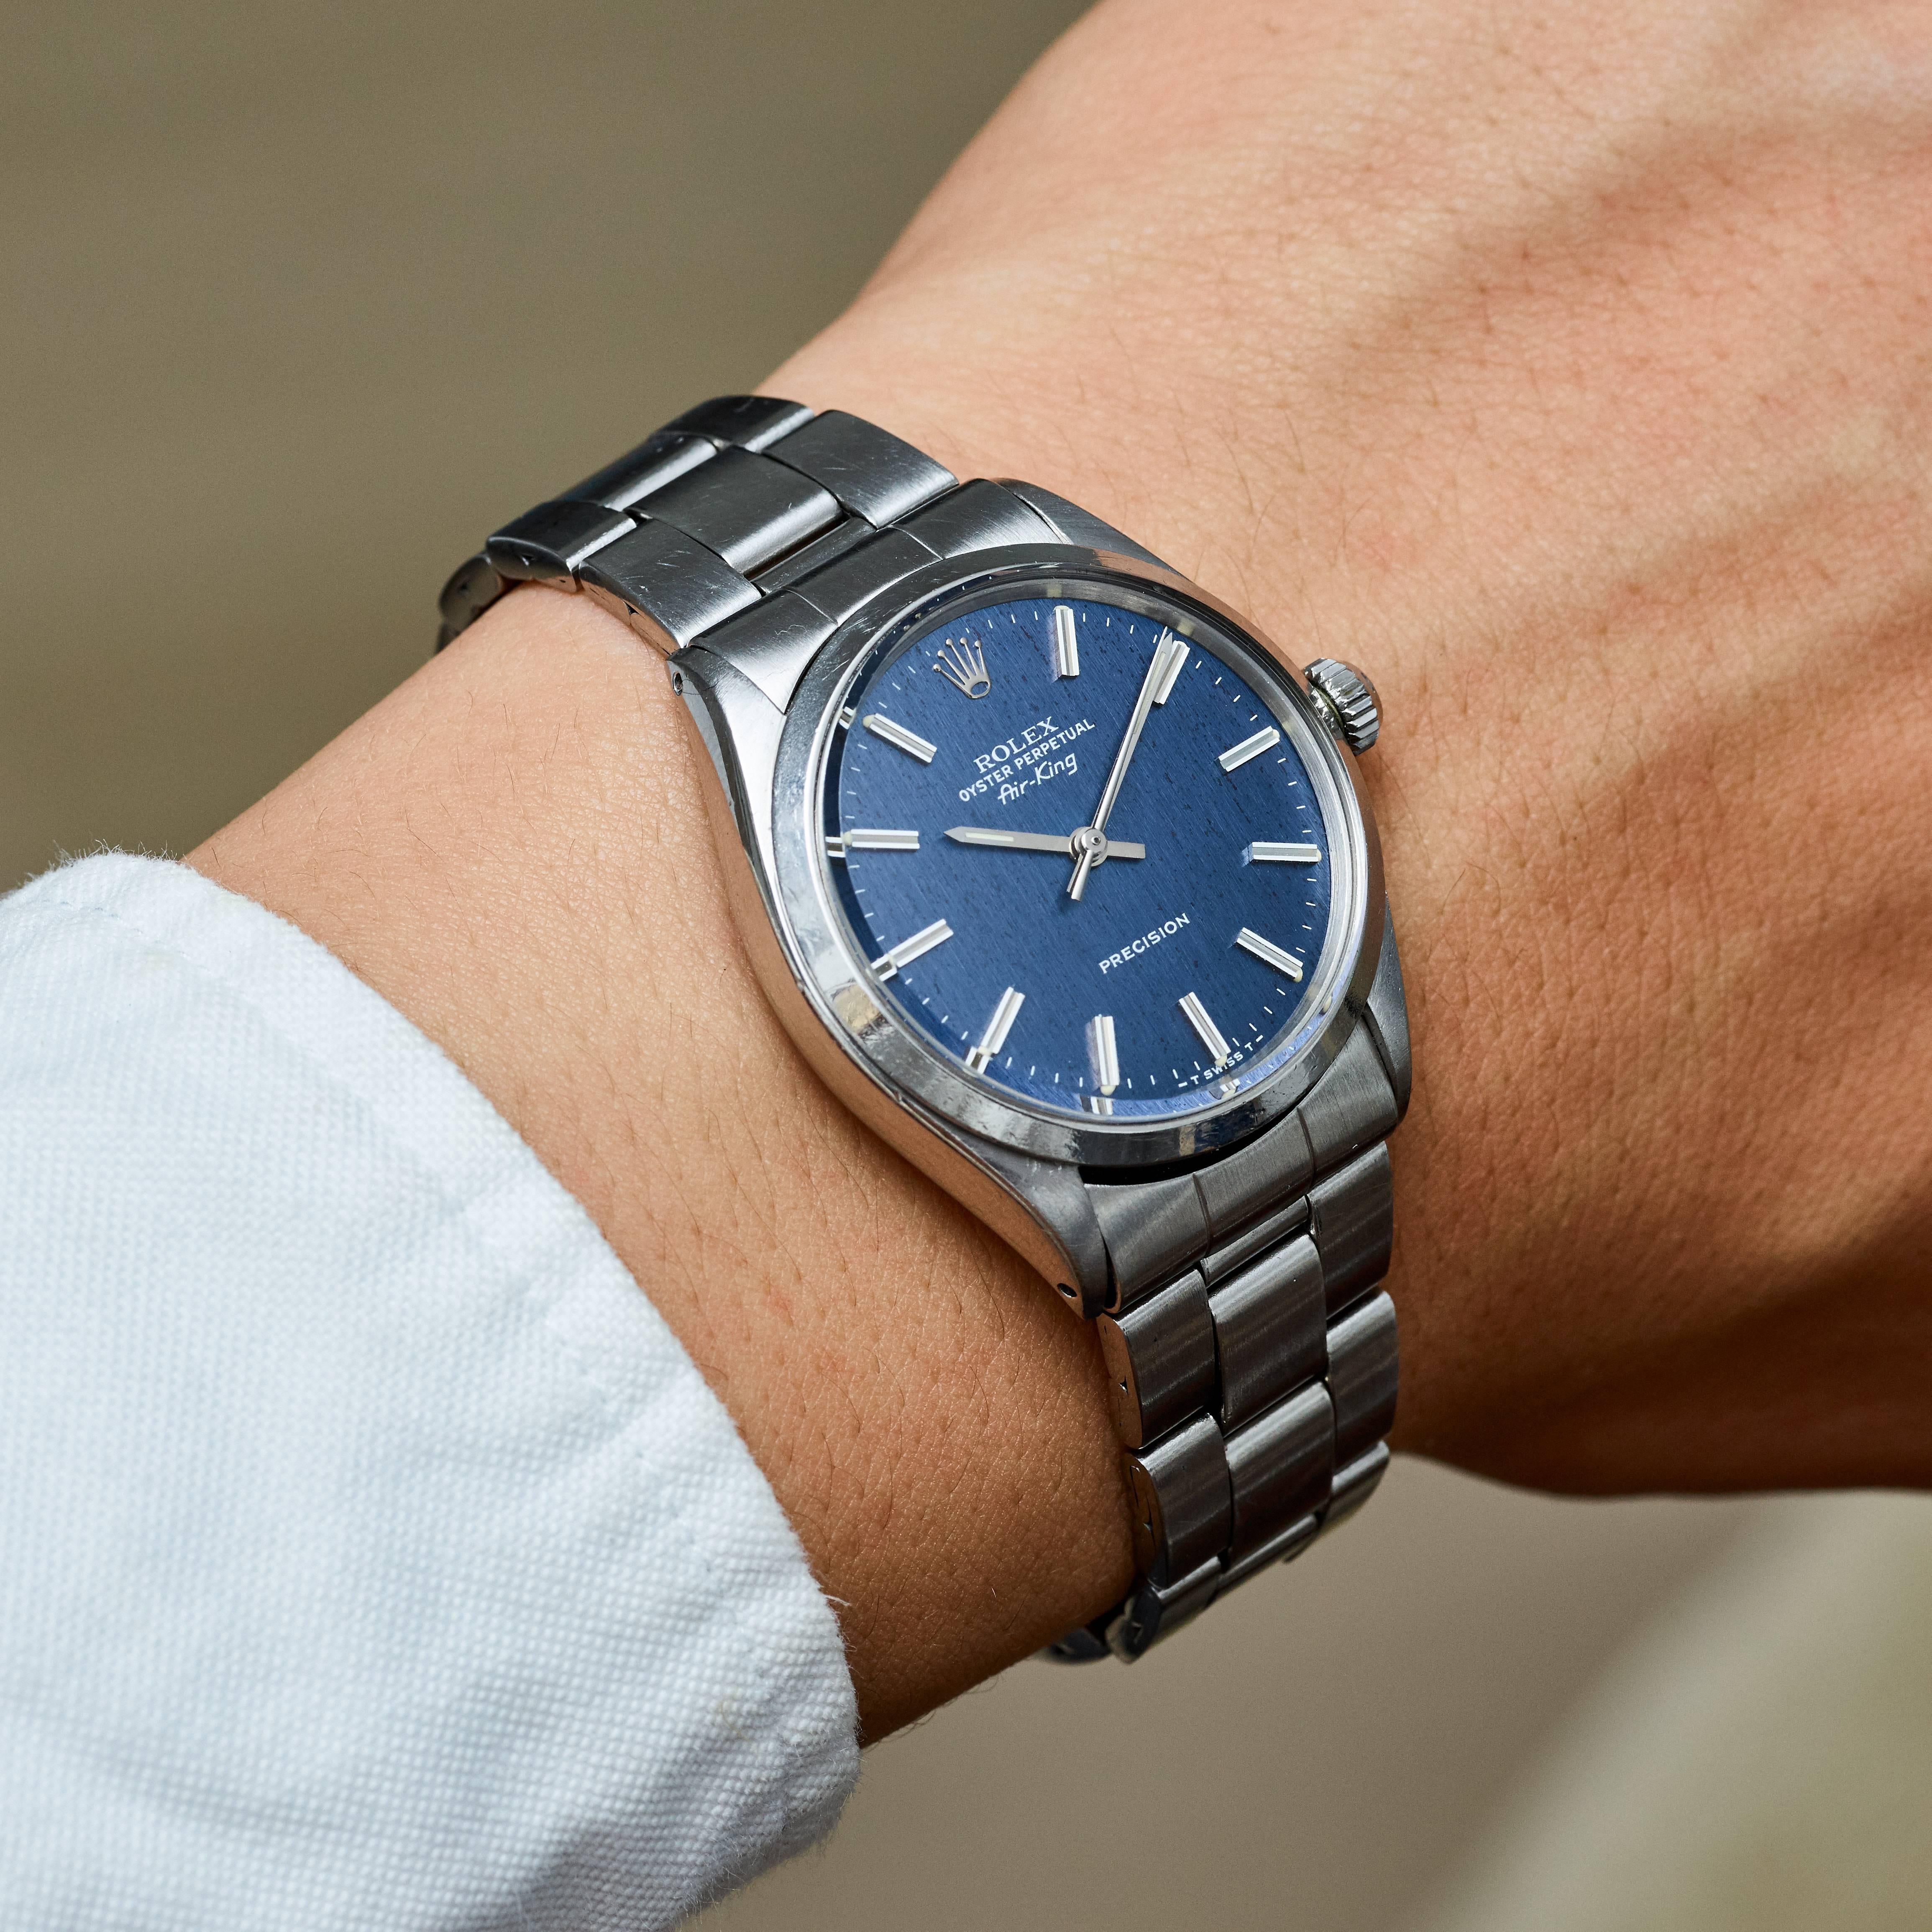 Rolex Stainless Steel Oyster Perpetual Air-King Stainless Steel Watch
Factory Blue Linen Dial with Wide Index Markers
Stainless Steel Smooth Bezel
Stainless Steel Case
34mm in size 
Features Rolex Automatic Movement 
Acrylic Crystal
From Early